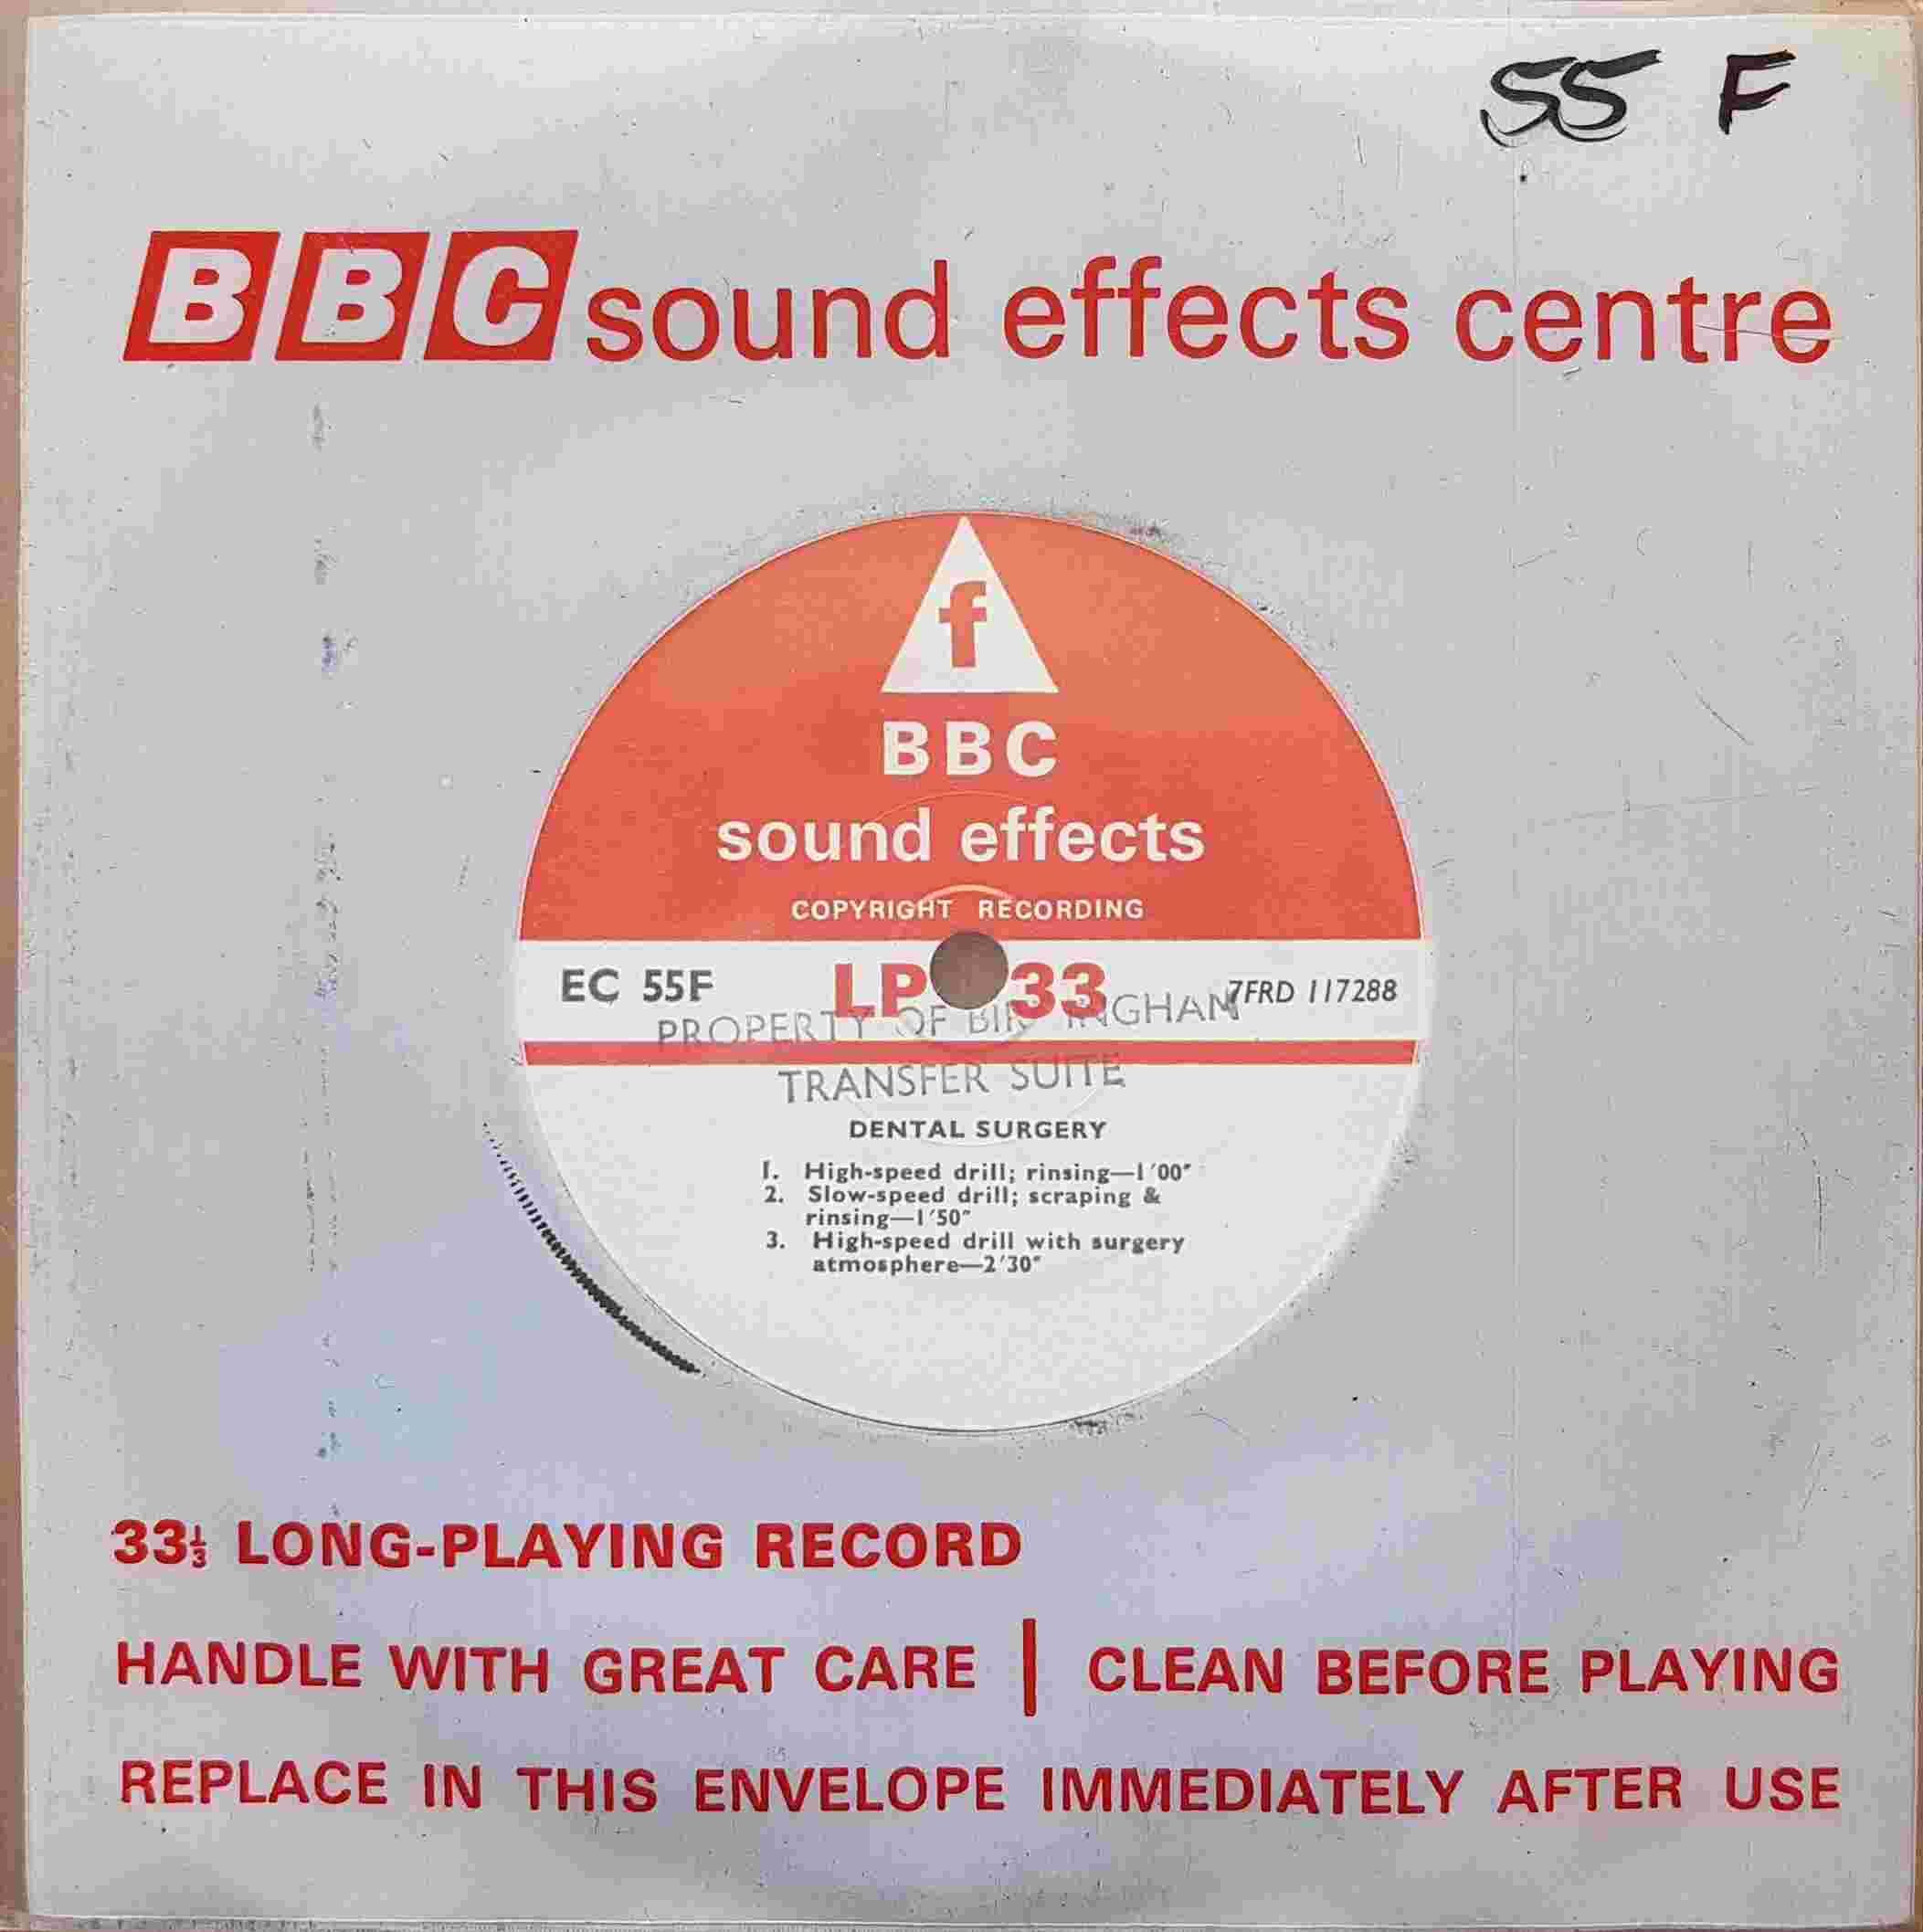 Picture of EC 55F Dental surgery by artist Not registered from the BBC singles - Records and Tapes library